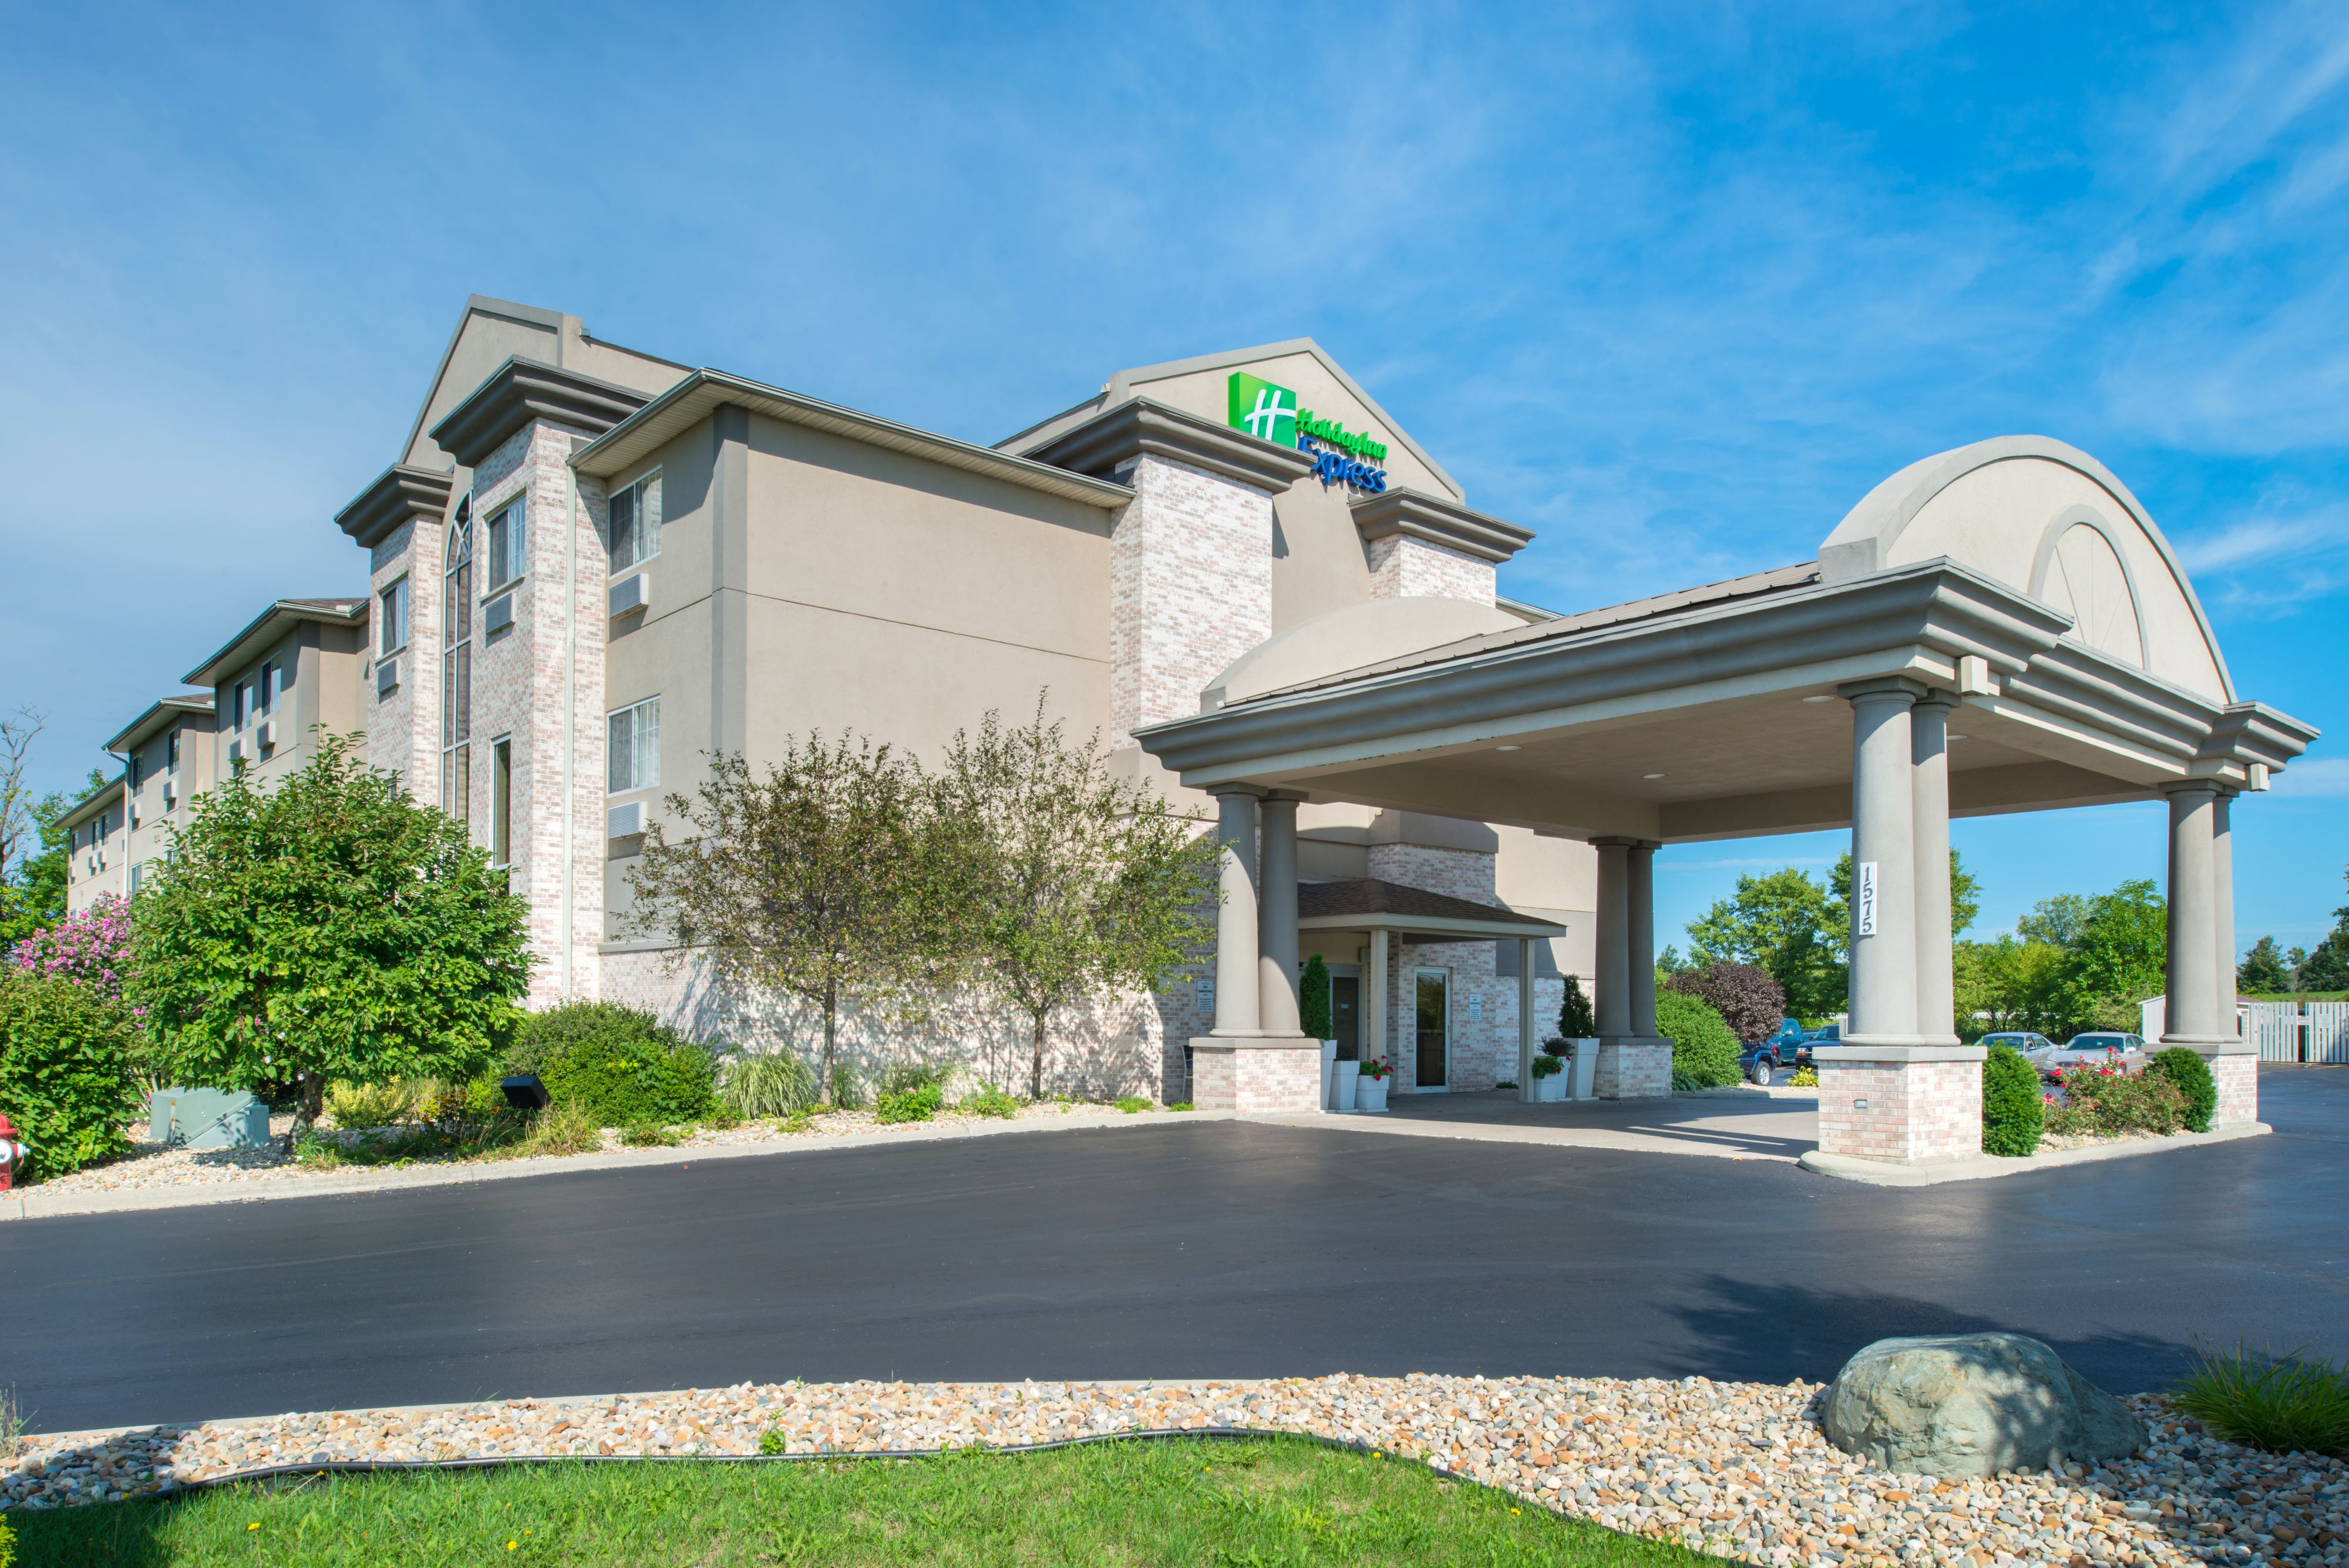 holiday-inn-express-and-suites-bucyrus-4719804983-original.jpg